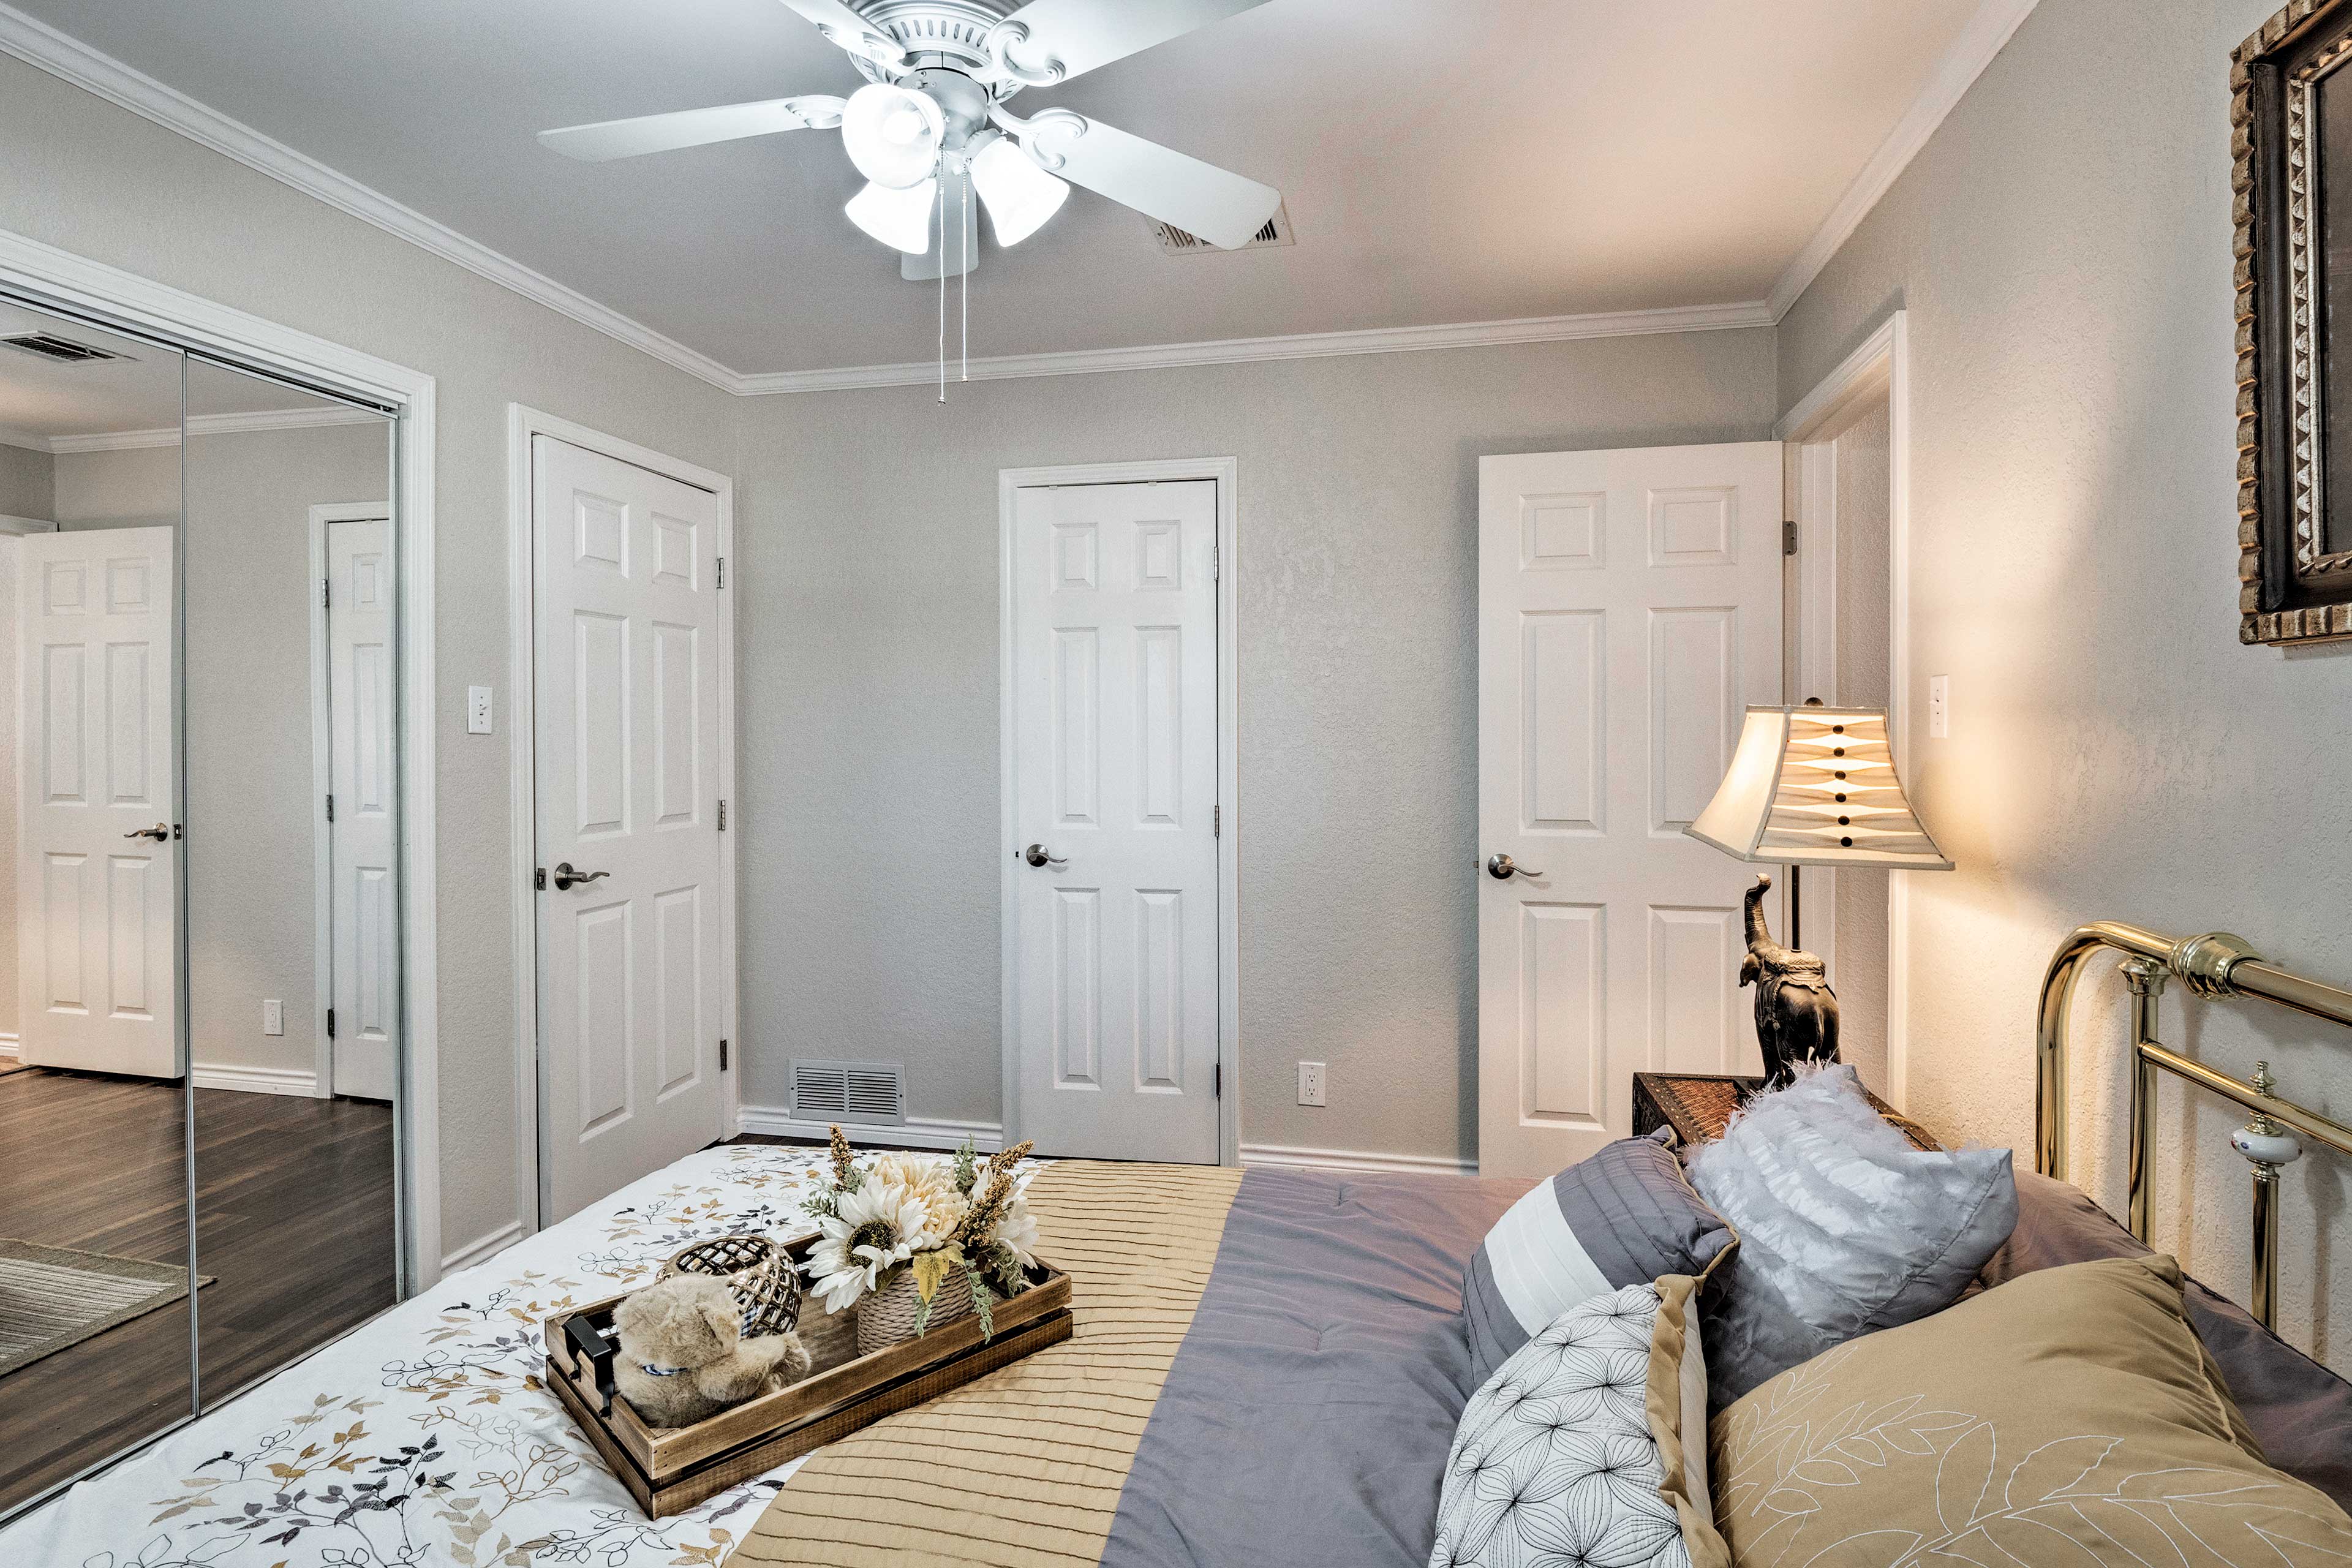 The ceiling fan will help keep you cool.